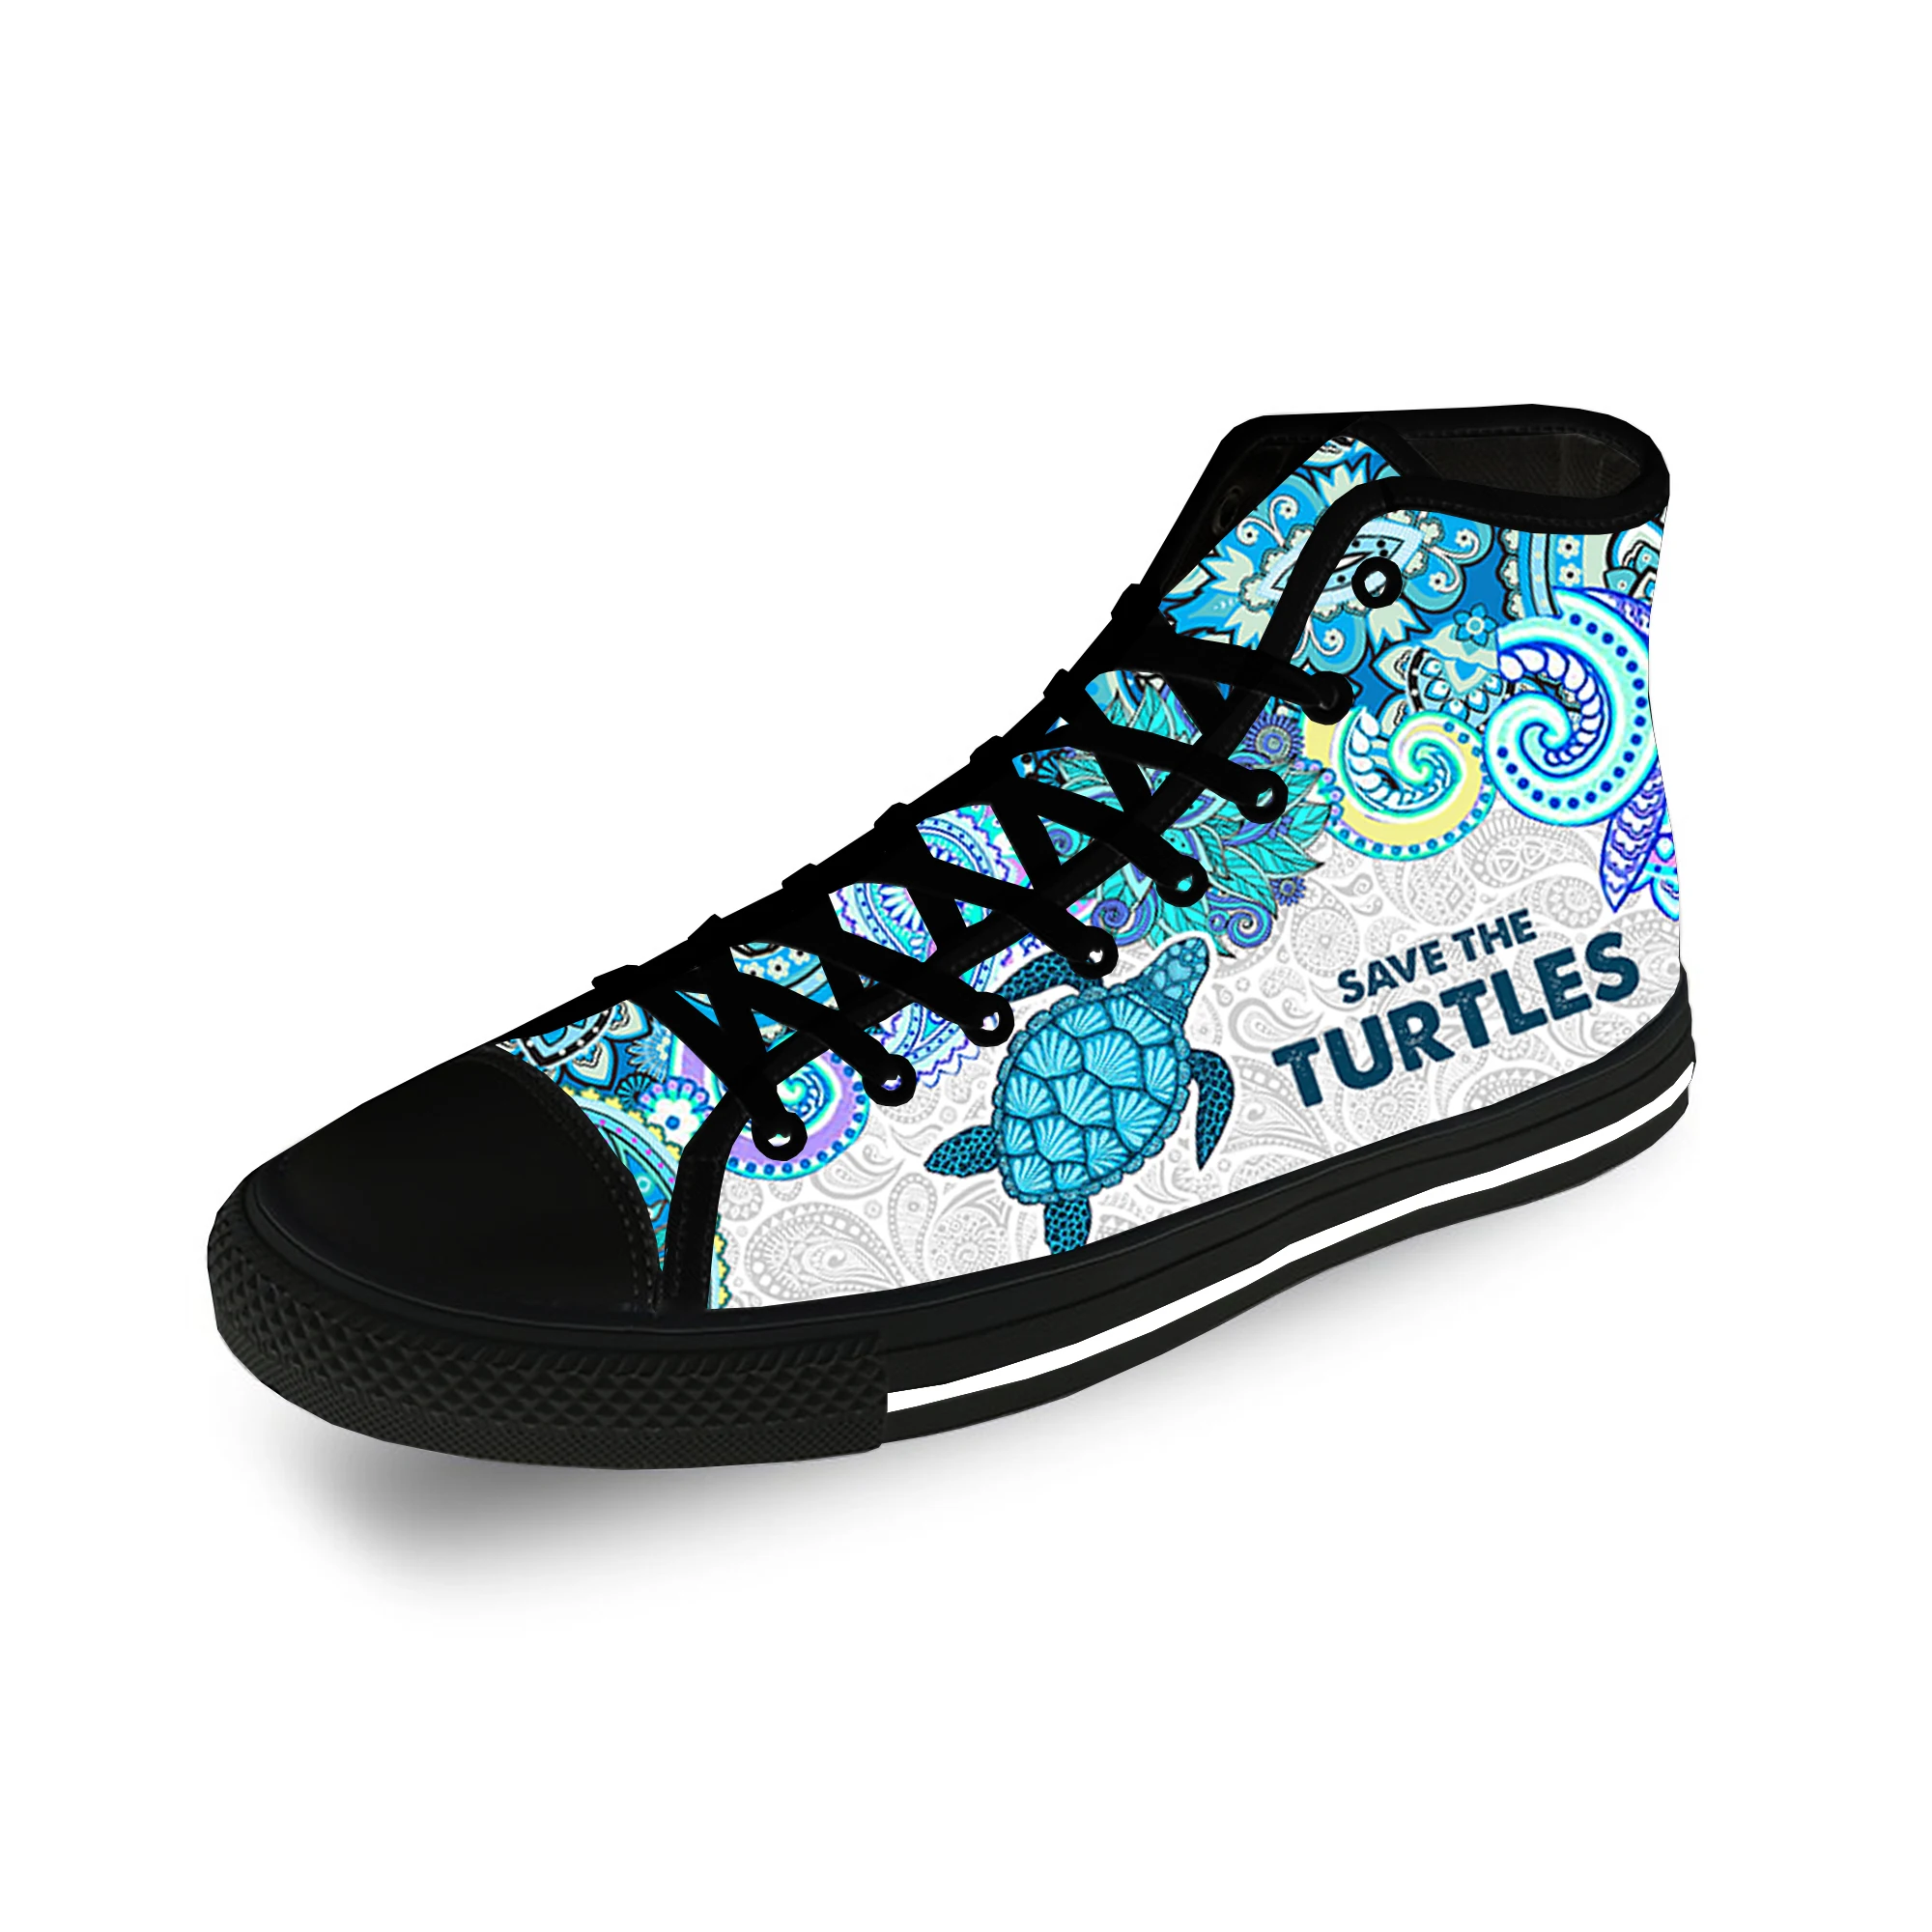 save the turtles high top sneakers mens womens teenager casual shoes canvas running shoes 3d print breathable lightweight shoe Save The Turtles High Top Sneakers Mens Womens Teenager Casual Shoes Canvas Running Shoes 3D Print Breathable Lightweight shoe